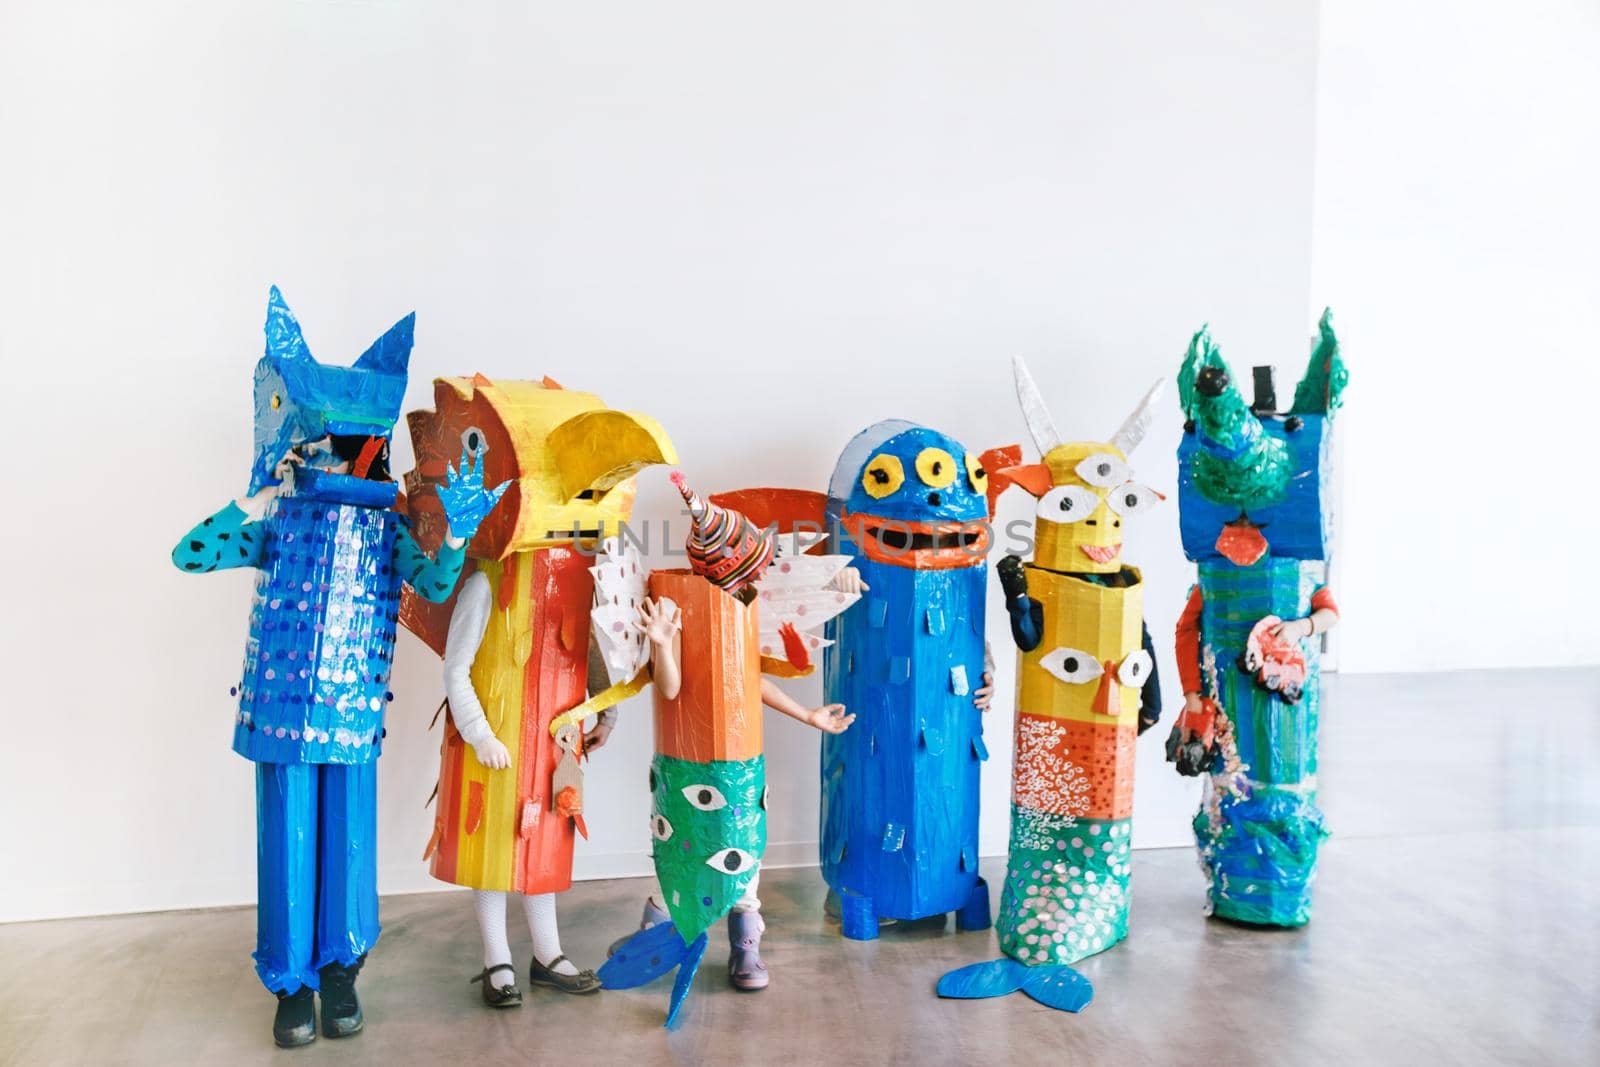 People in handmade colorful monsters costumes standing together in studio.